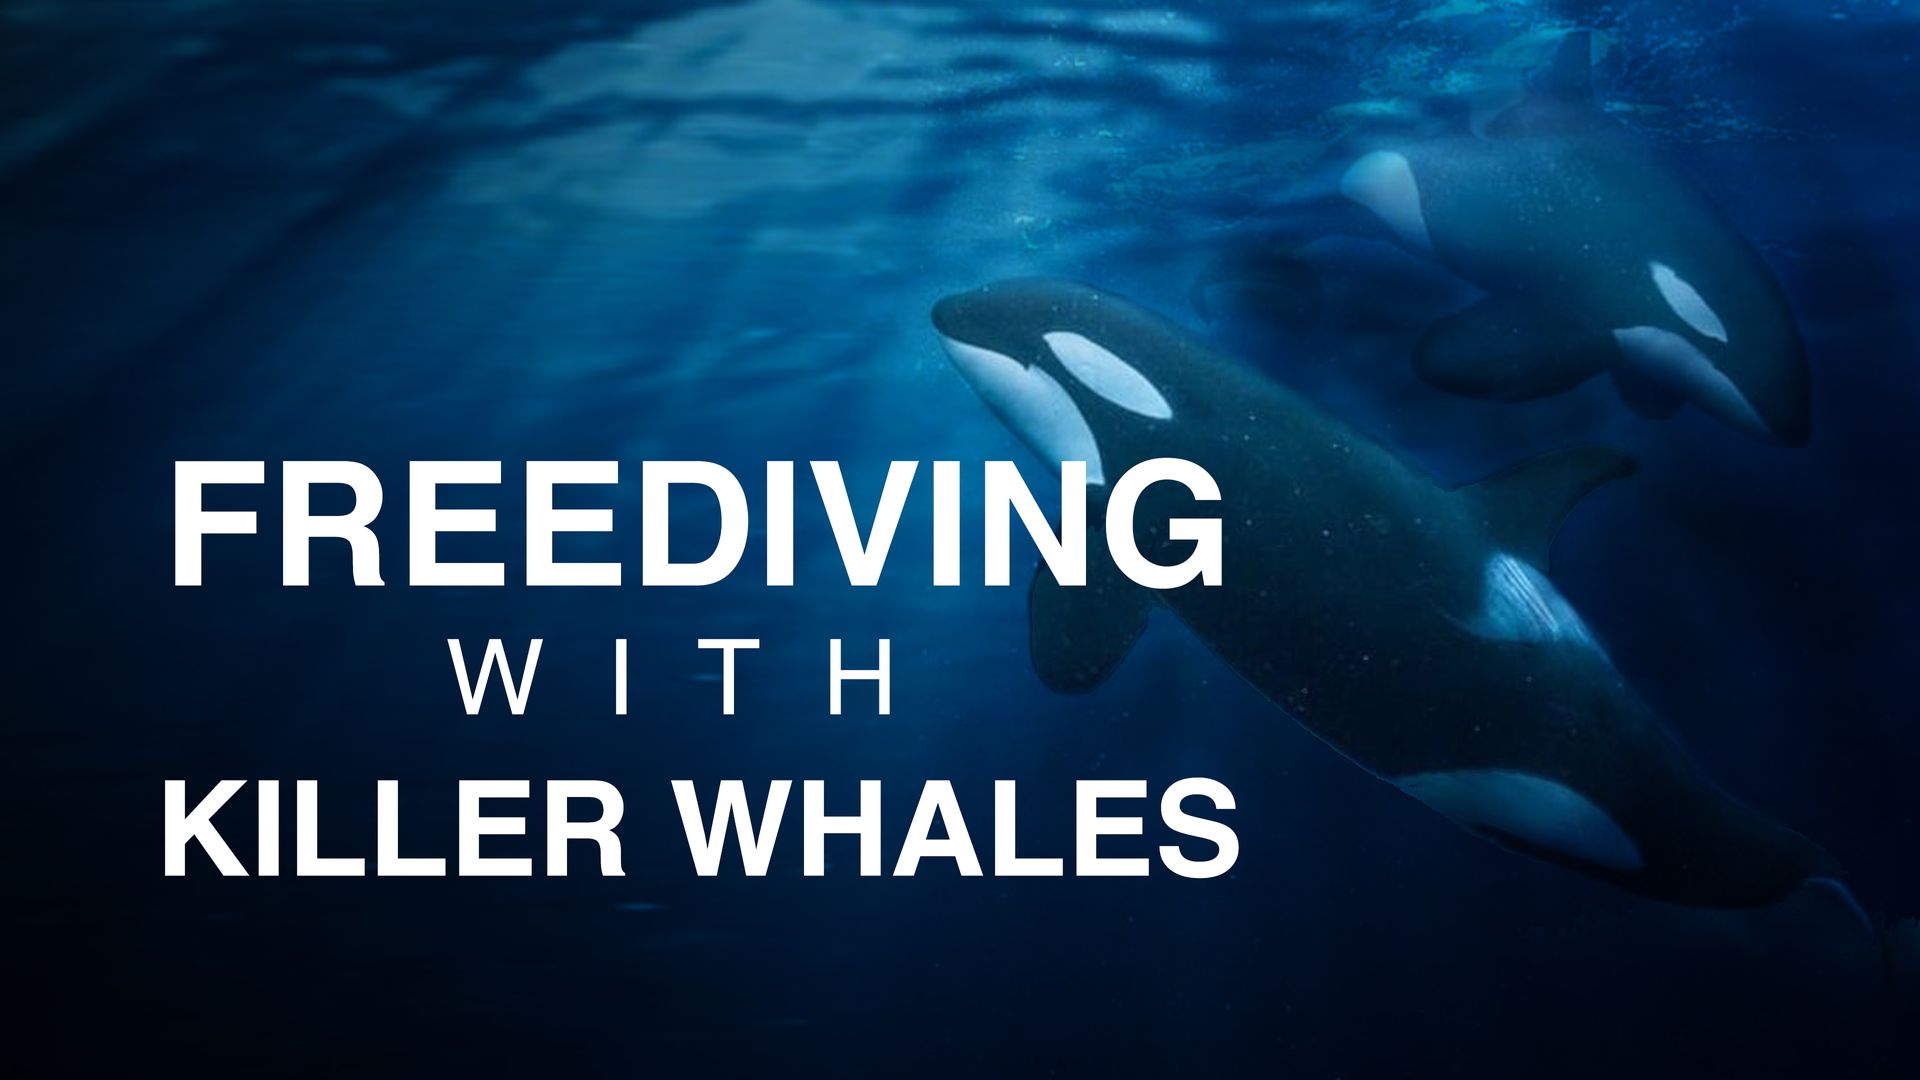 Free Diving With Killer Whales